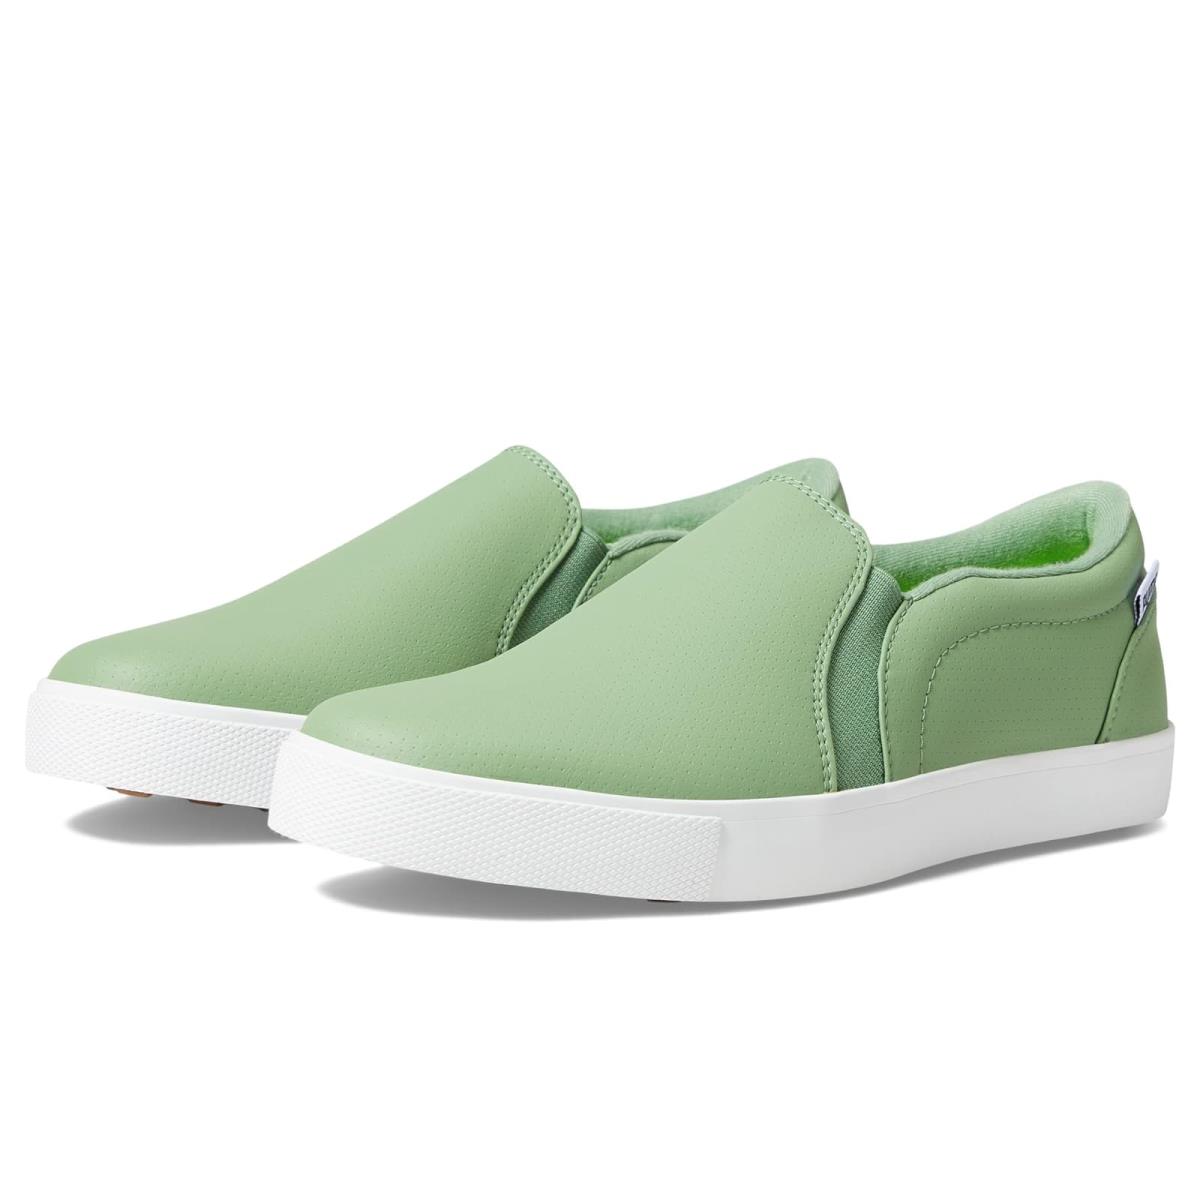 Woman`s Sneakers Athletic Shoes Puma Golf Tustin Fusion Slip-on Golf Shoes Dusty Green/Puma White